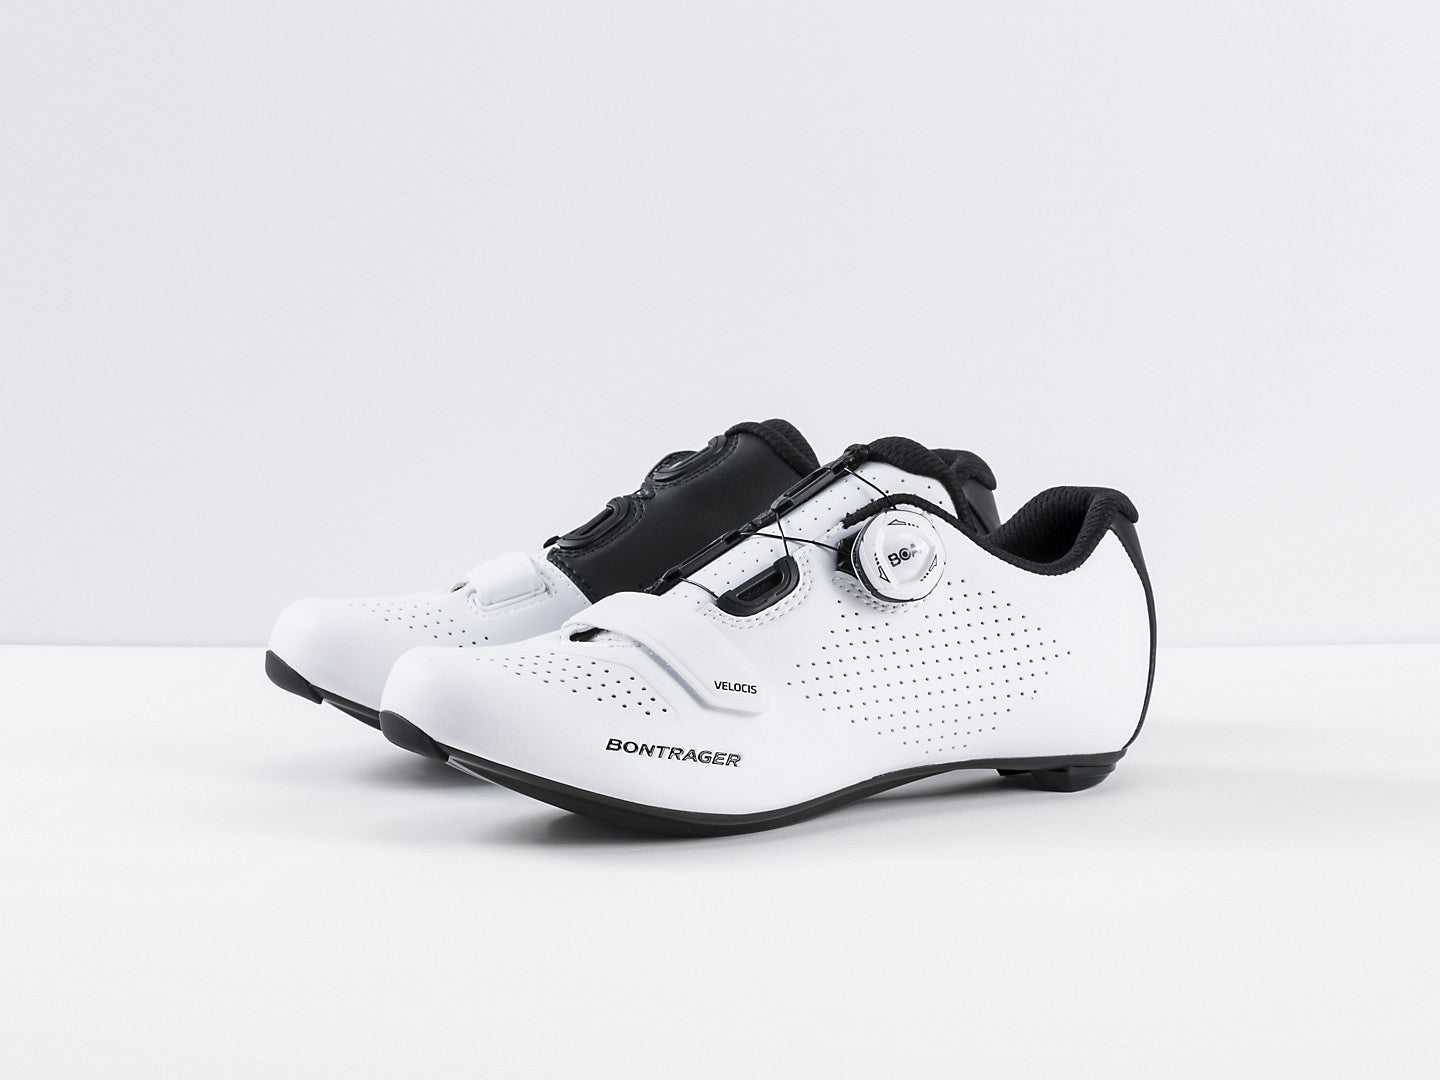 Bontrager Velocis Women's Road Cycling Shoes- Cycling Shoes- Road Cycling Shoes shoes